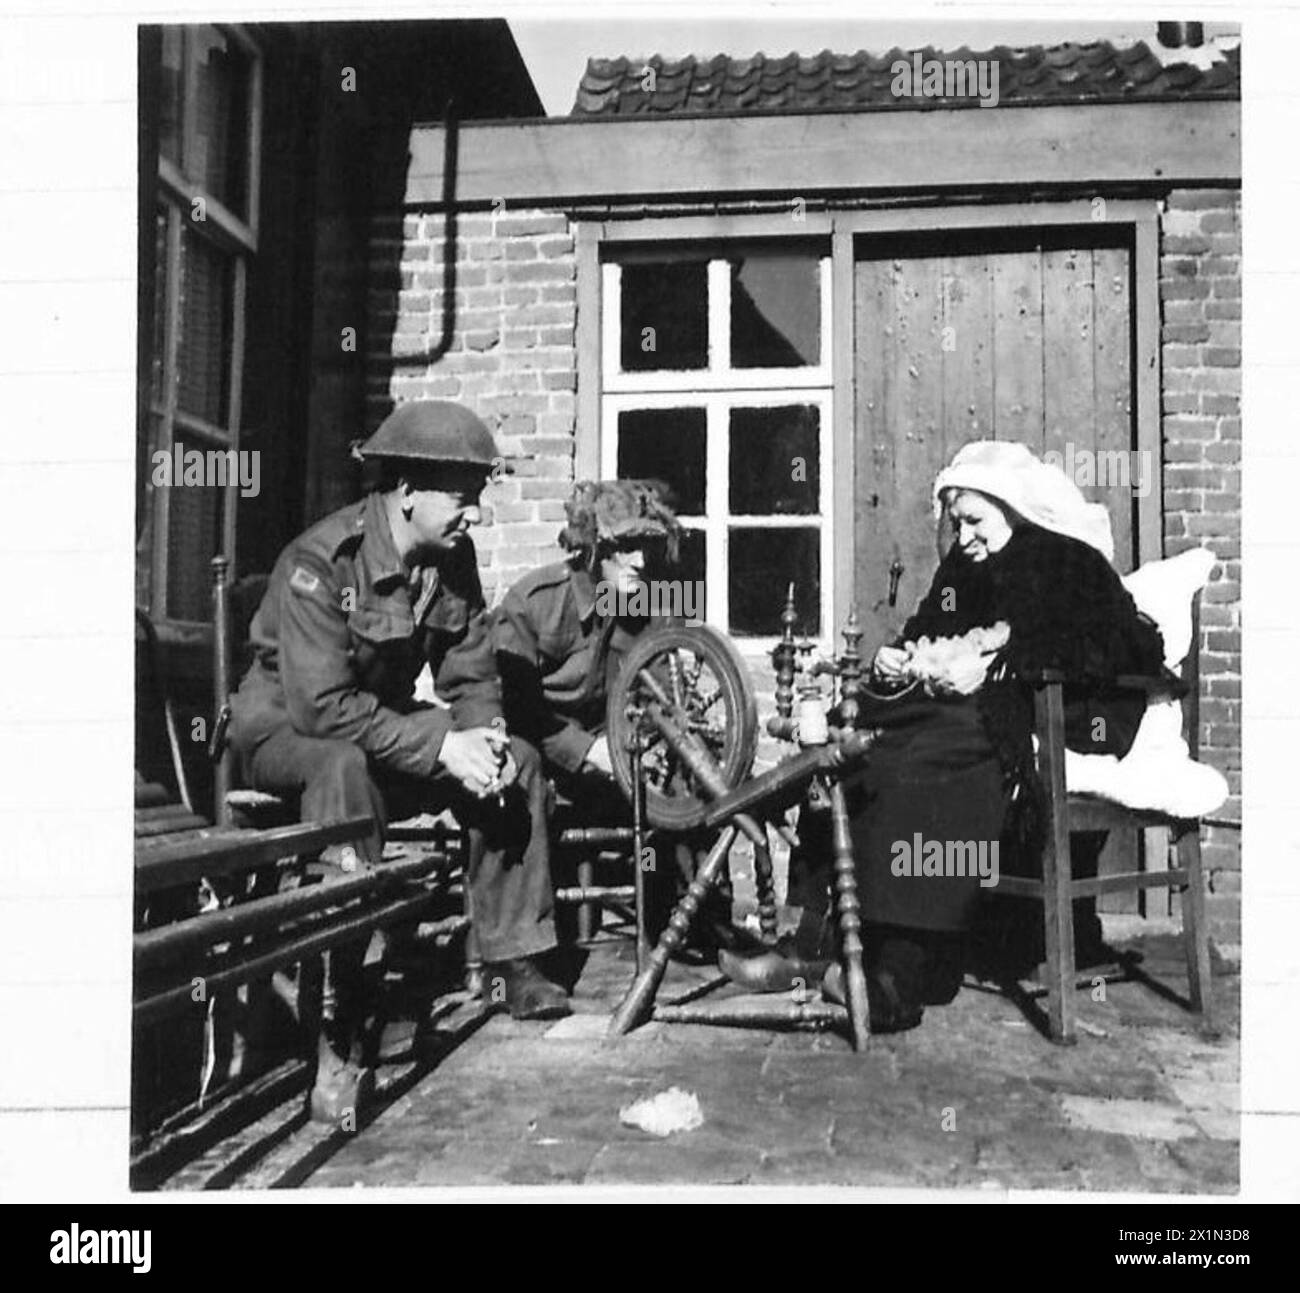 WITH THE BRITISH TROOPS IN HOLLAND. - Dvr. Hutton, J of Manchester and Gnr. Brazier, H.J. of Shifnal, Shropshire, both of the 75 A/Tk Regt., watch with great interest an old Dutch lady, 83 years of age, at work on an old spinning wheel, British Army, 21st Army Group Stock Photo